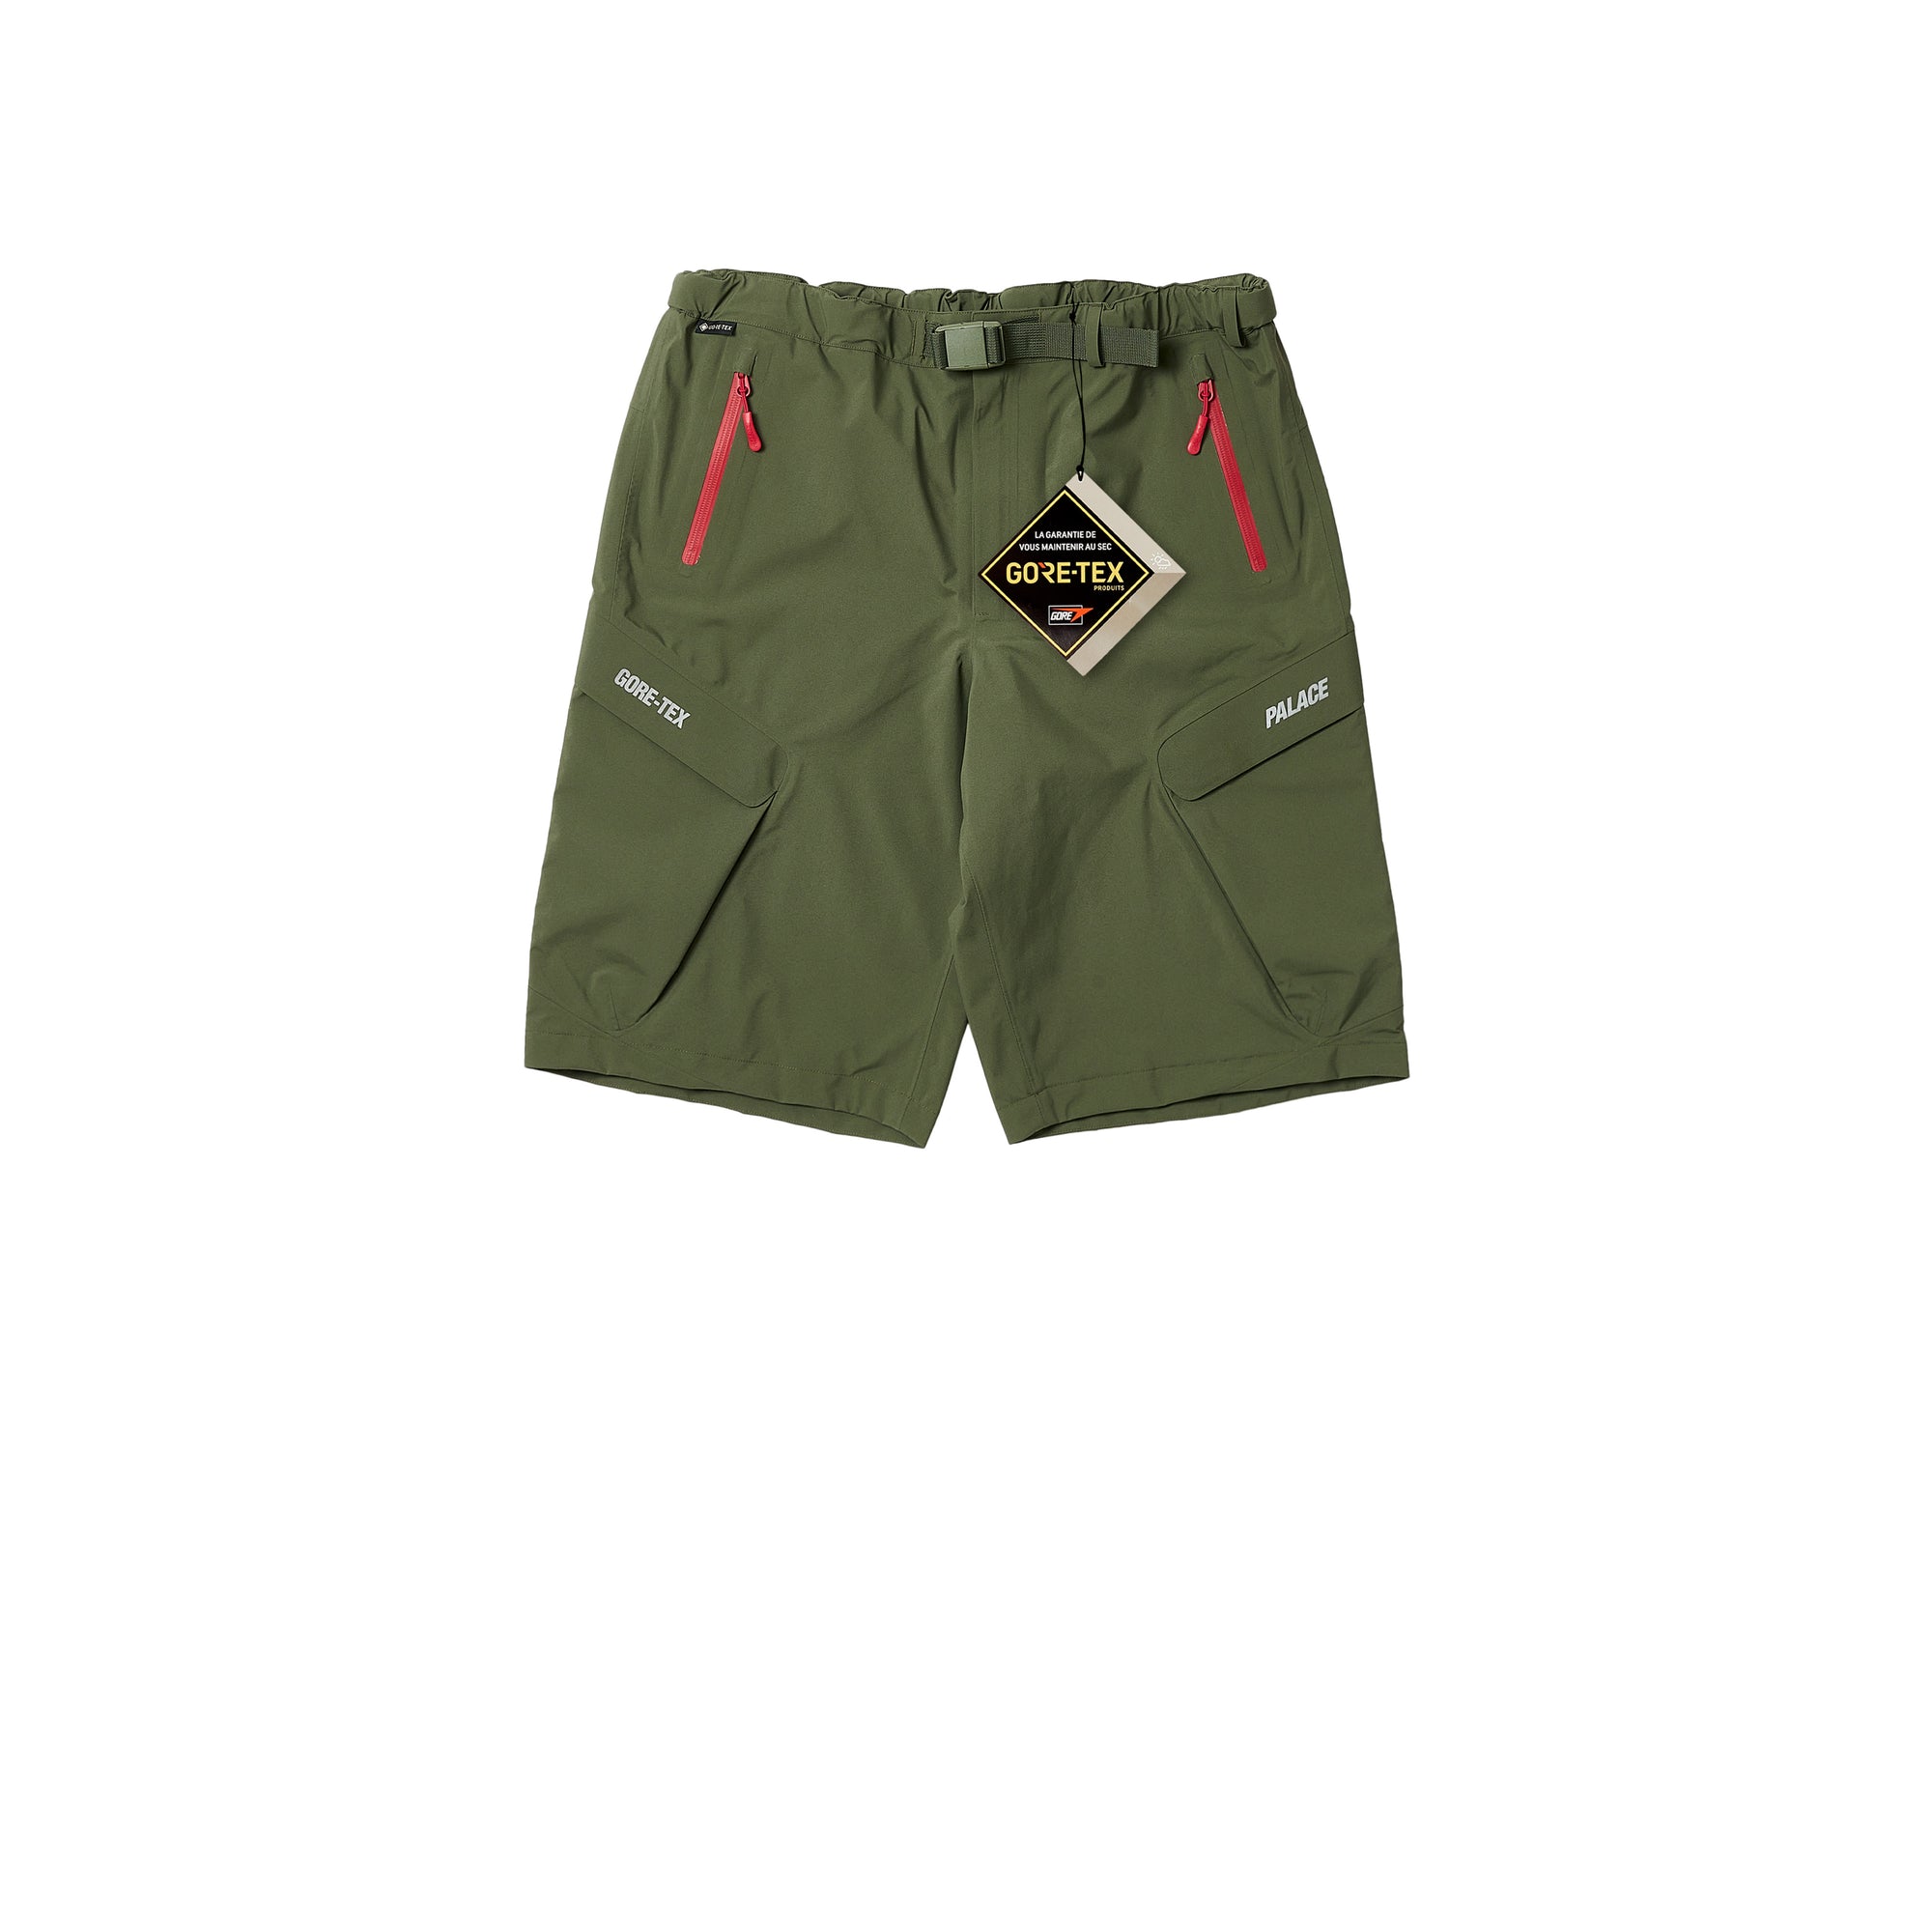 Palace - Gore-Tex R-Tek Cargo Short - (Olive) view 1